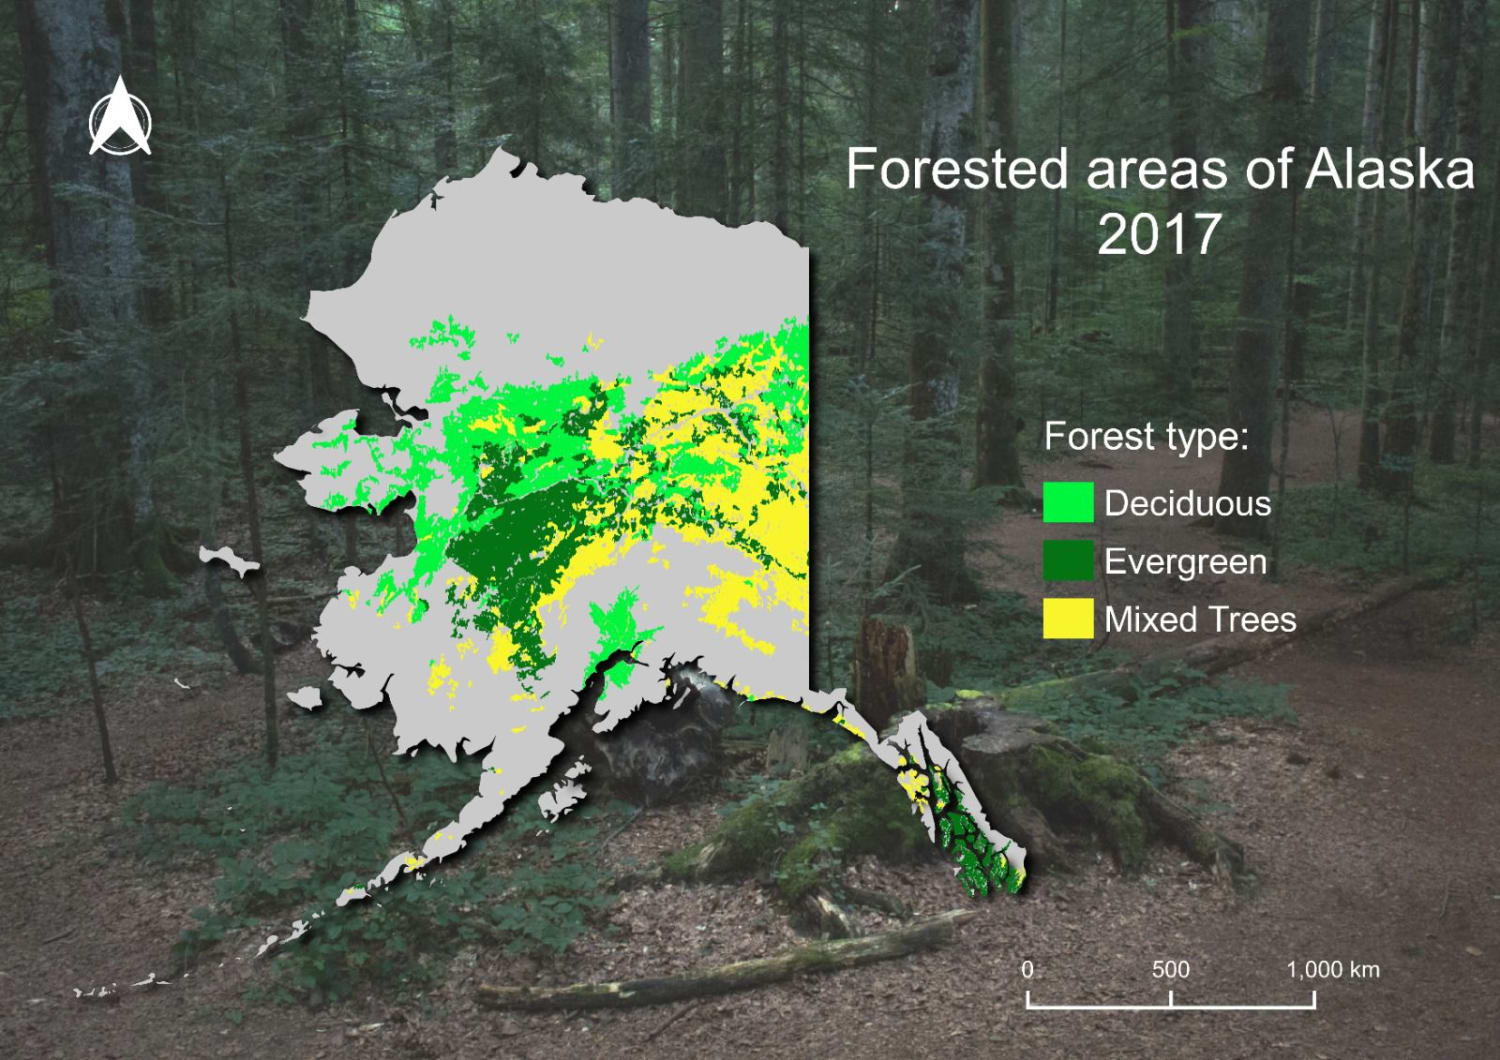 forestry situation of Alaska in 2017